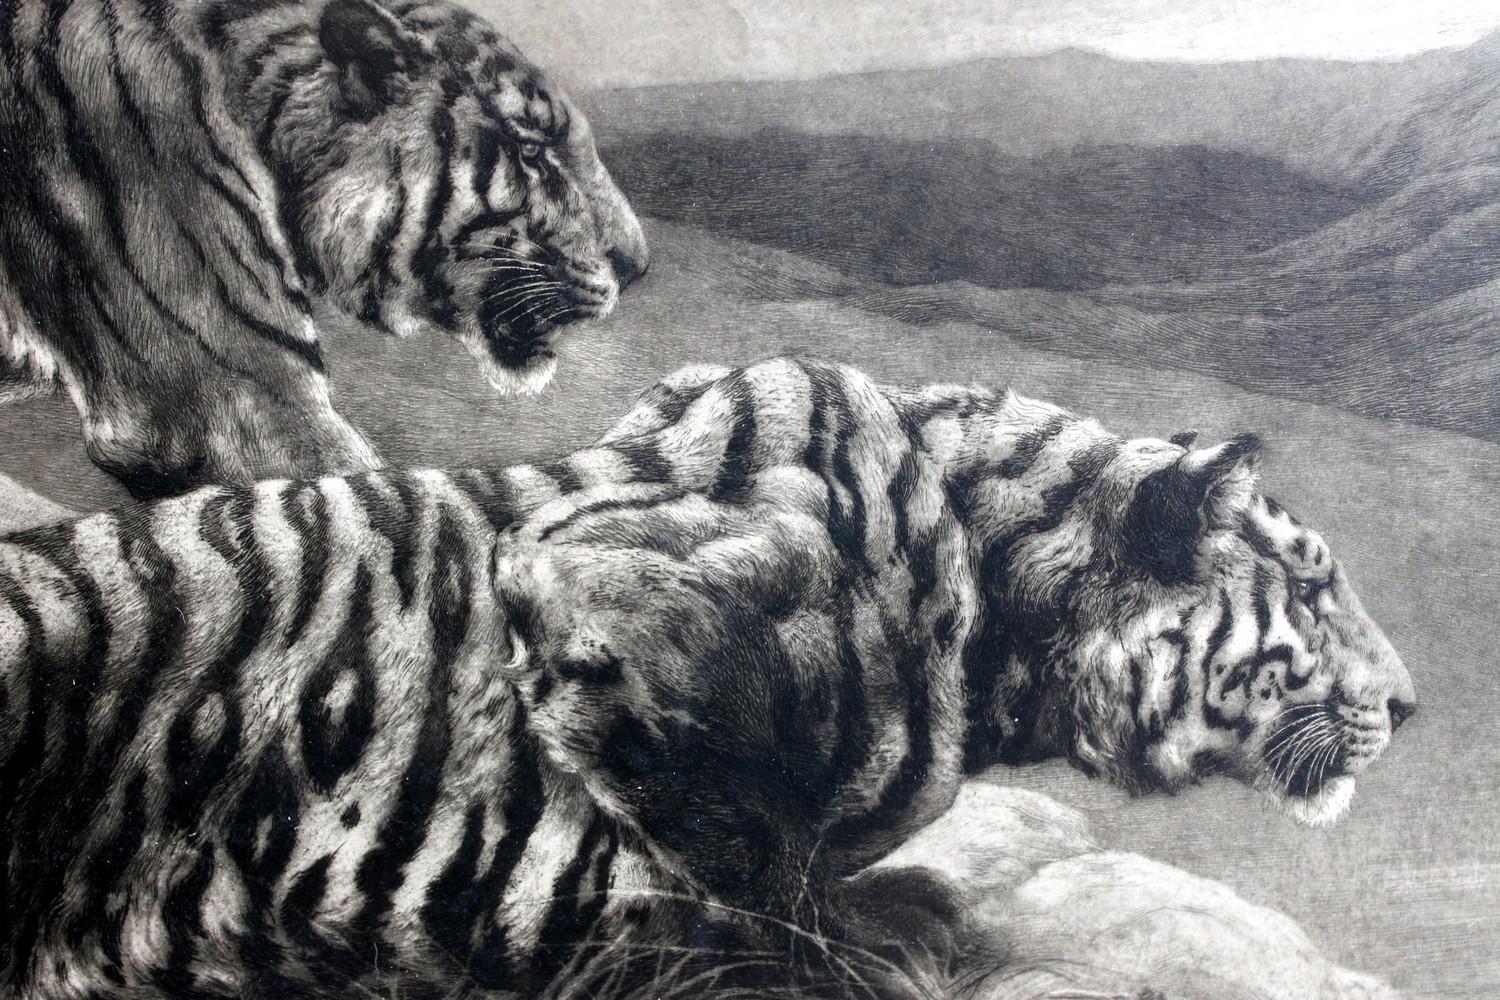 Black and White Etching with Tigers, the Destroyers - Print by Herbert Dicksee